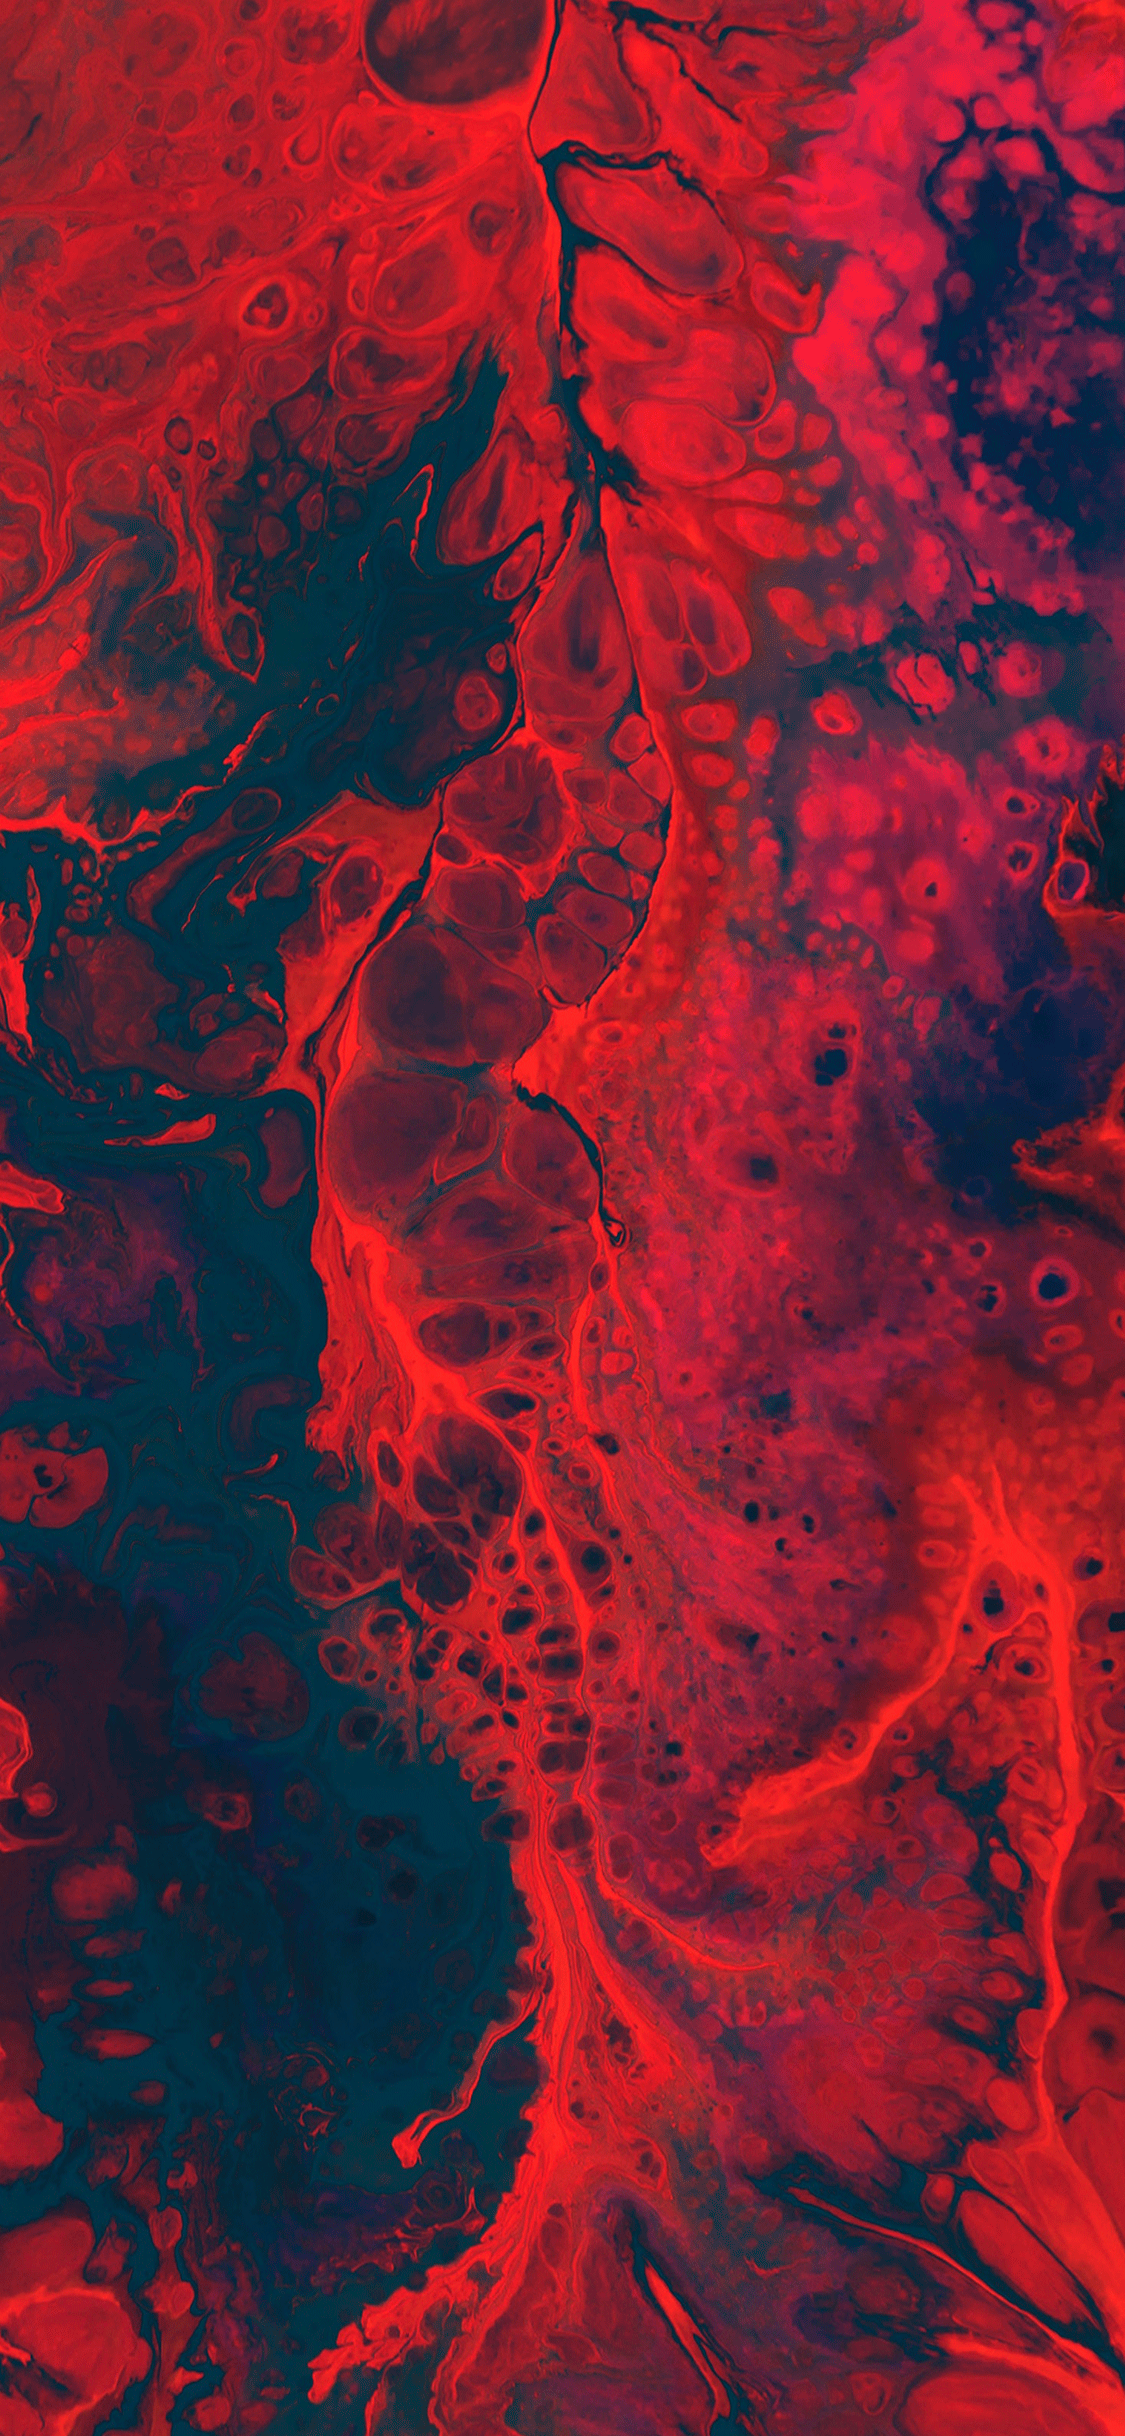 A painting of red and blue paint - Abstract